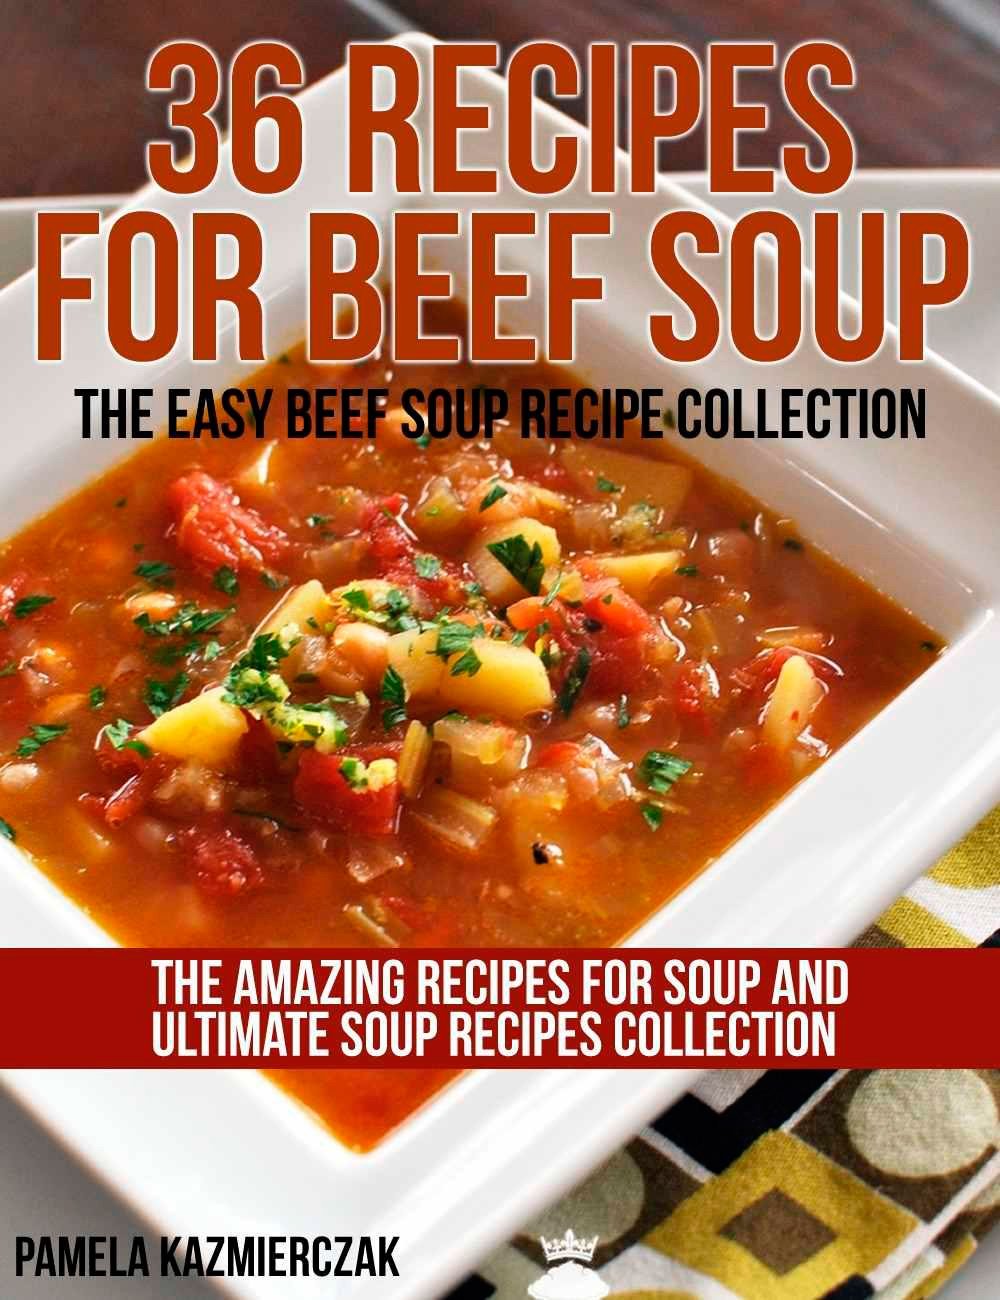 36 Recipes For Beef Soup - The Easy Beef Soup Recipe Collection